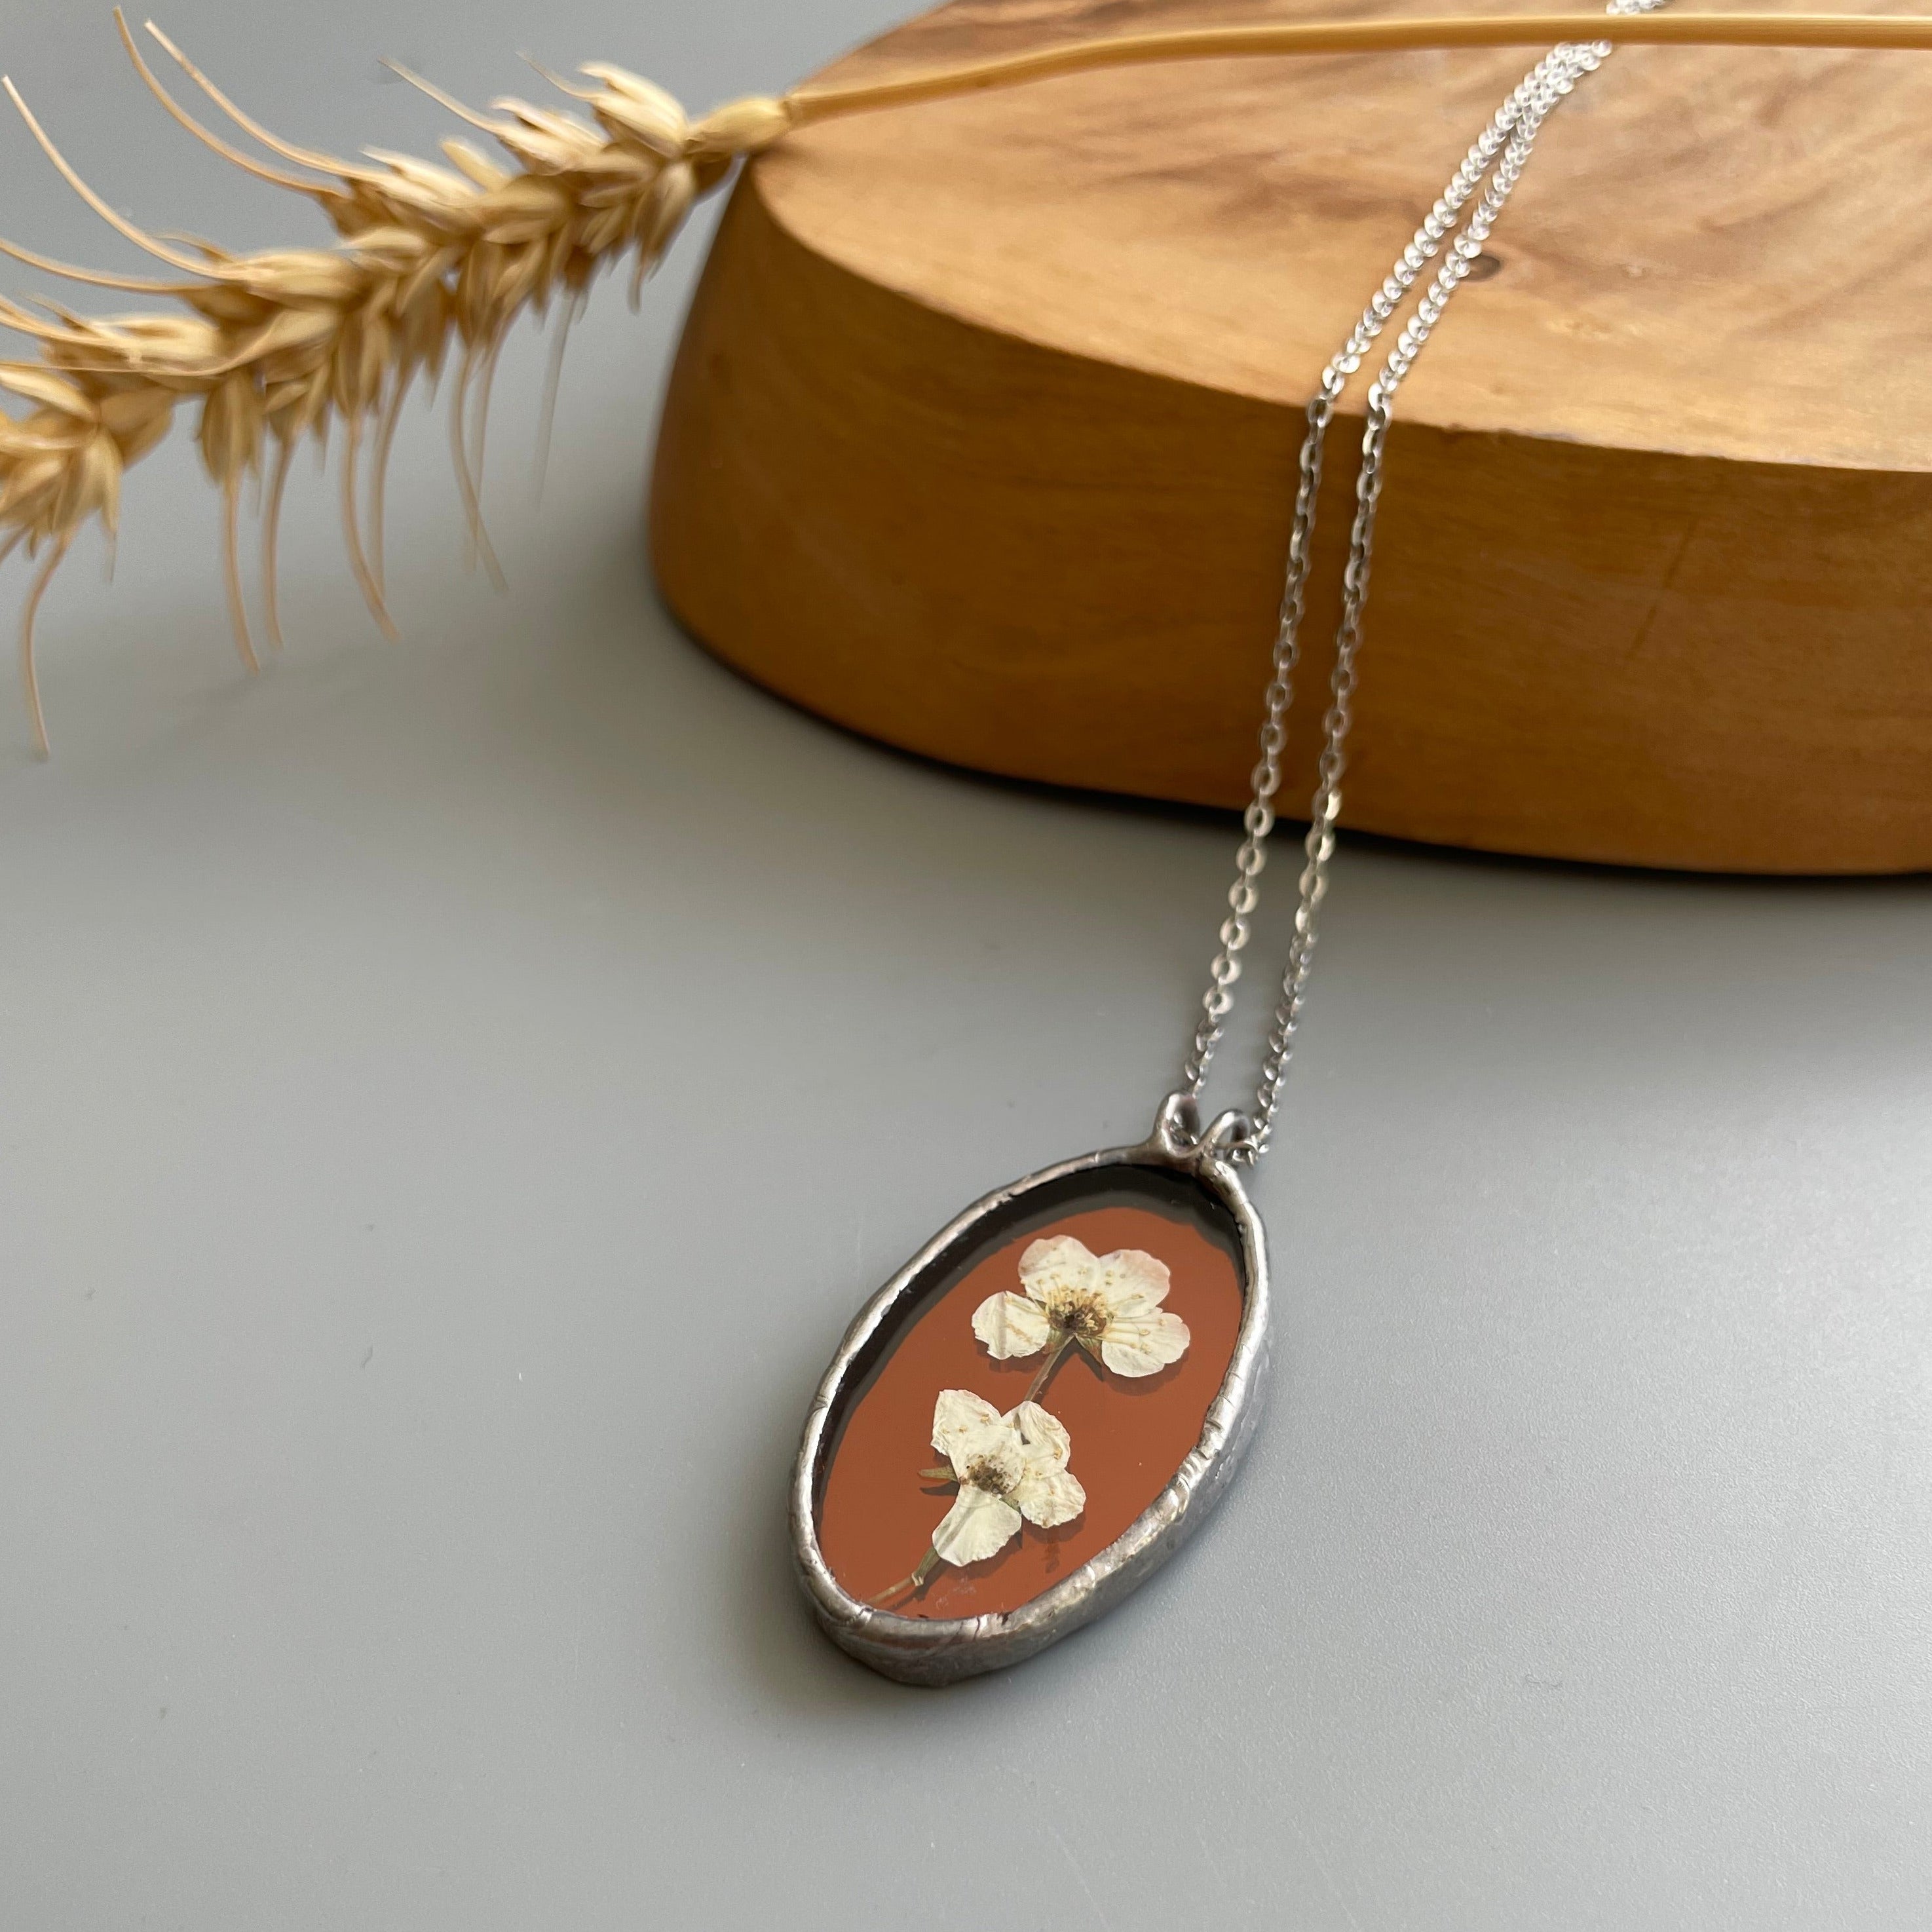 Oval Shaped Stain Glass Necklace with Dried Flower